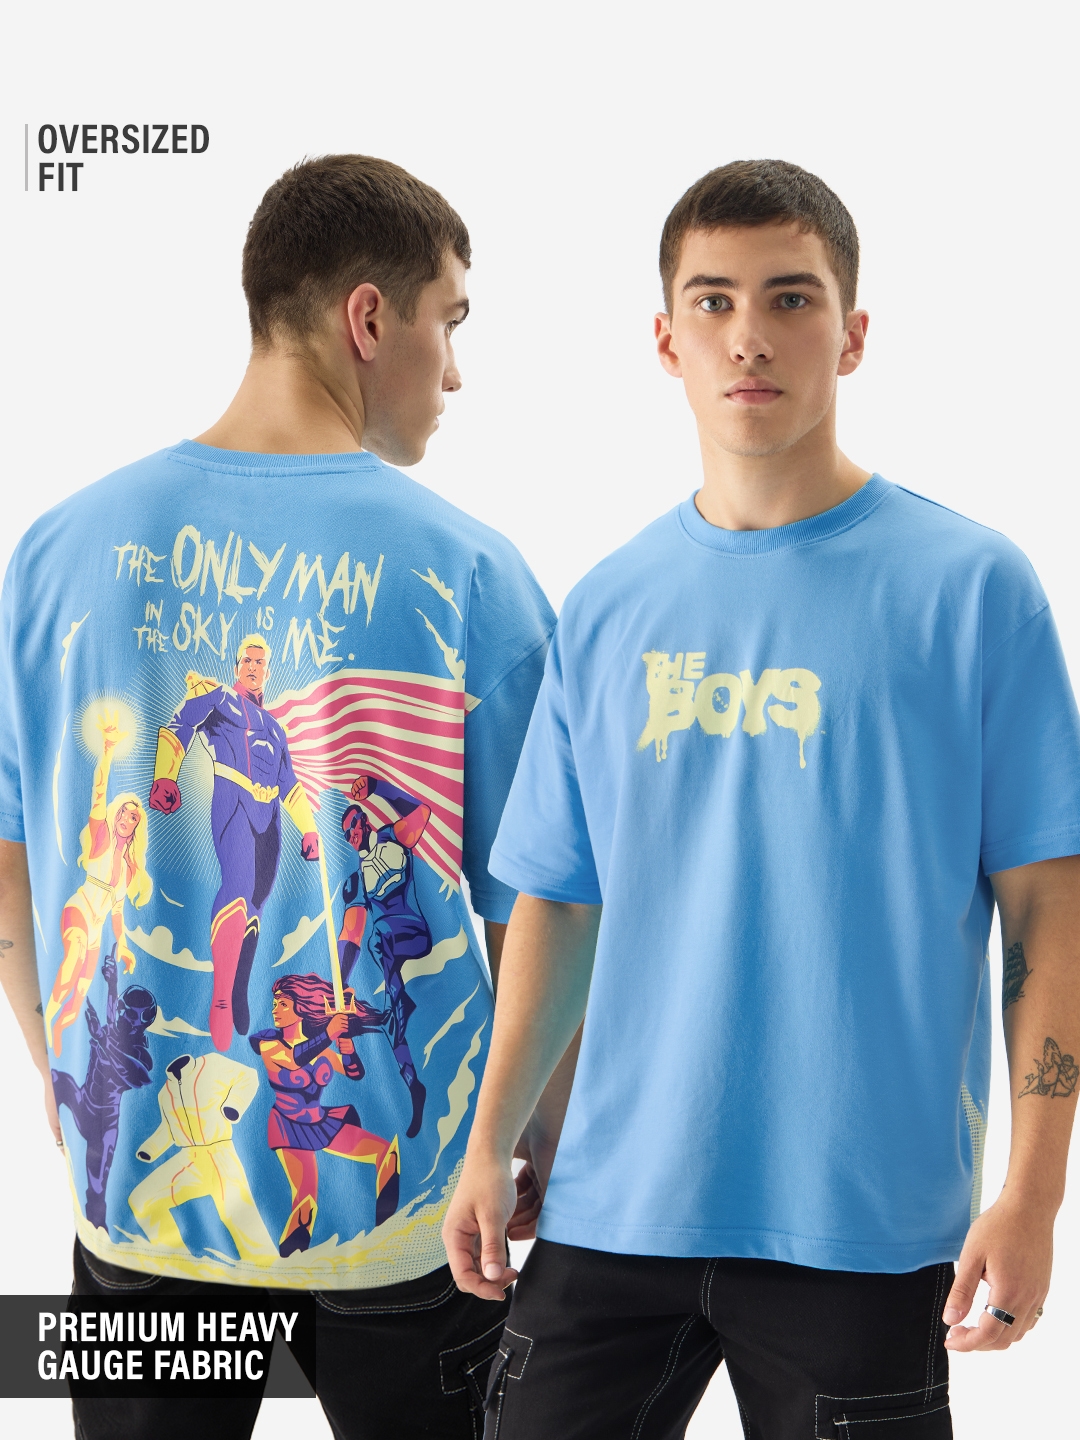 Men's The Boys Only Man In The Sky Oversized T-Shirts